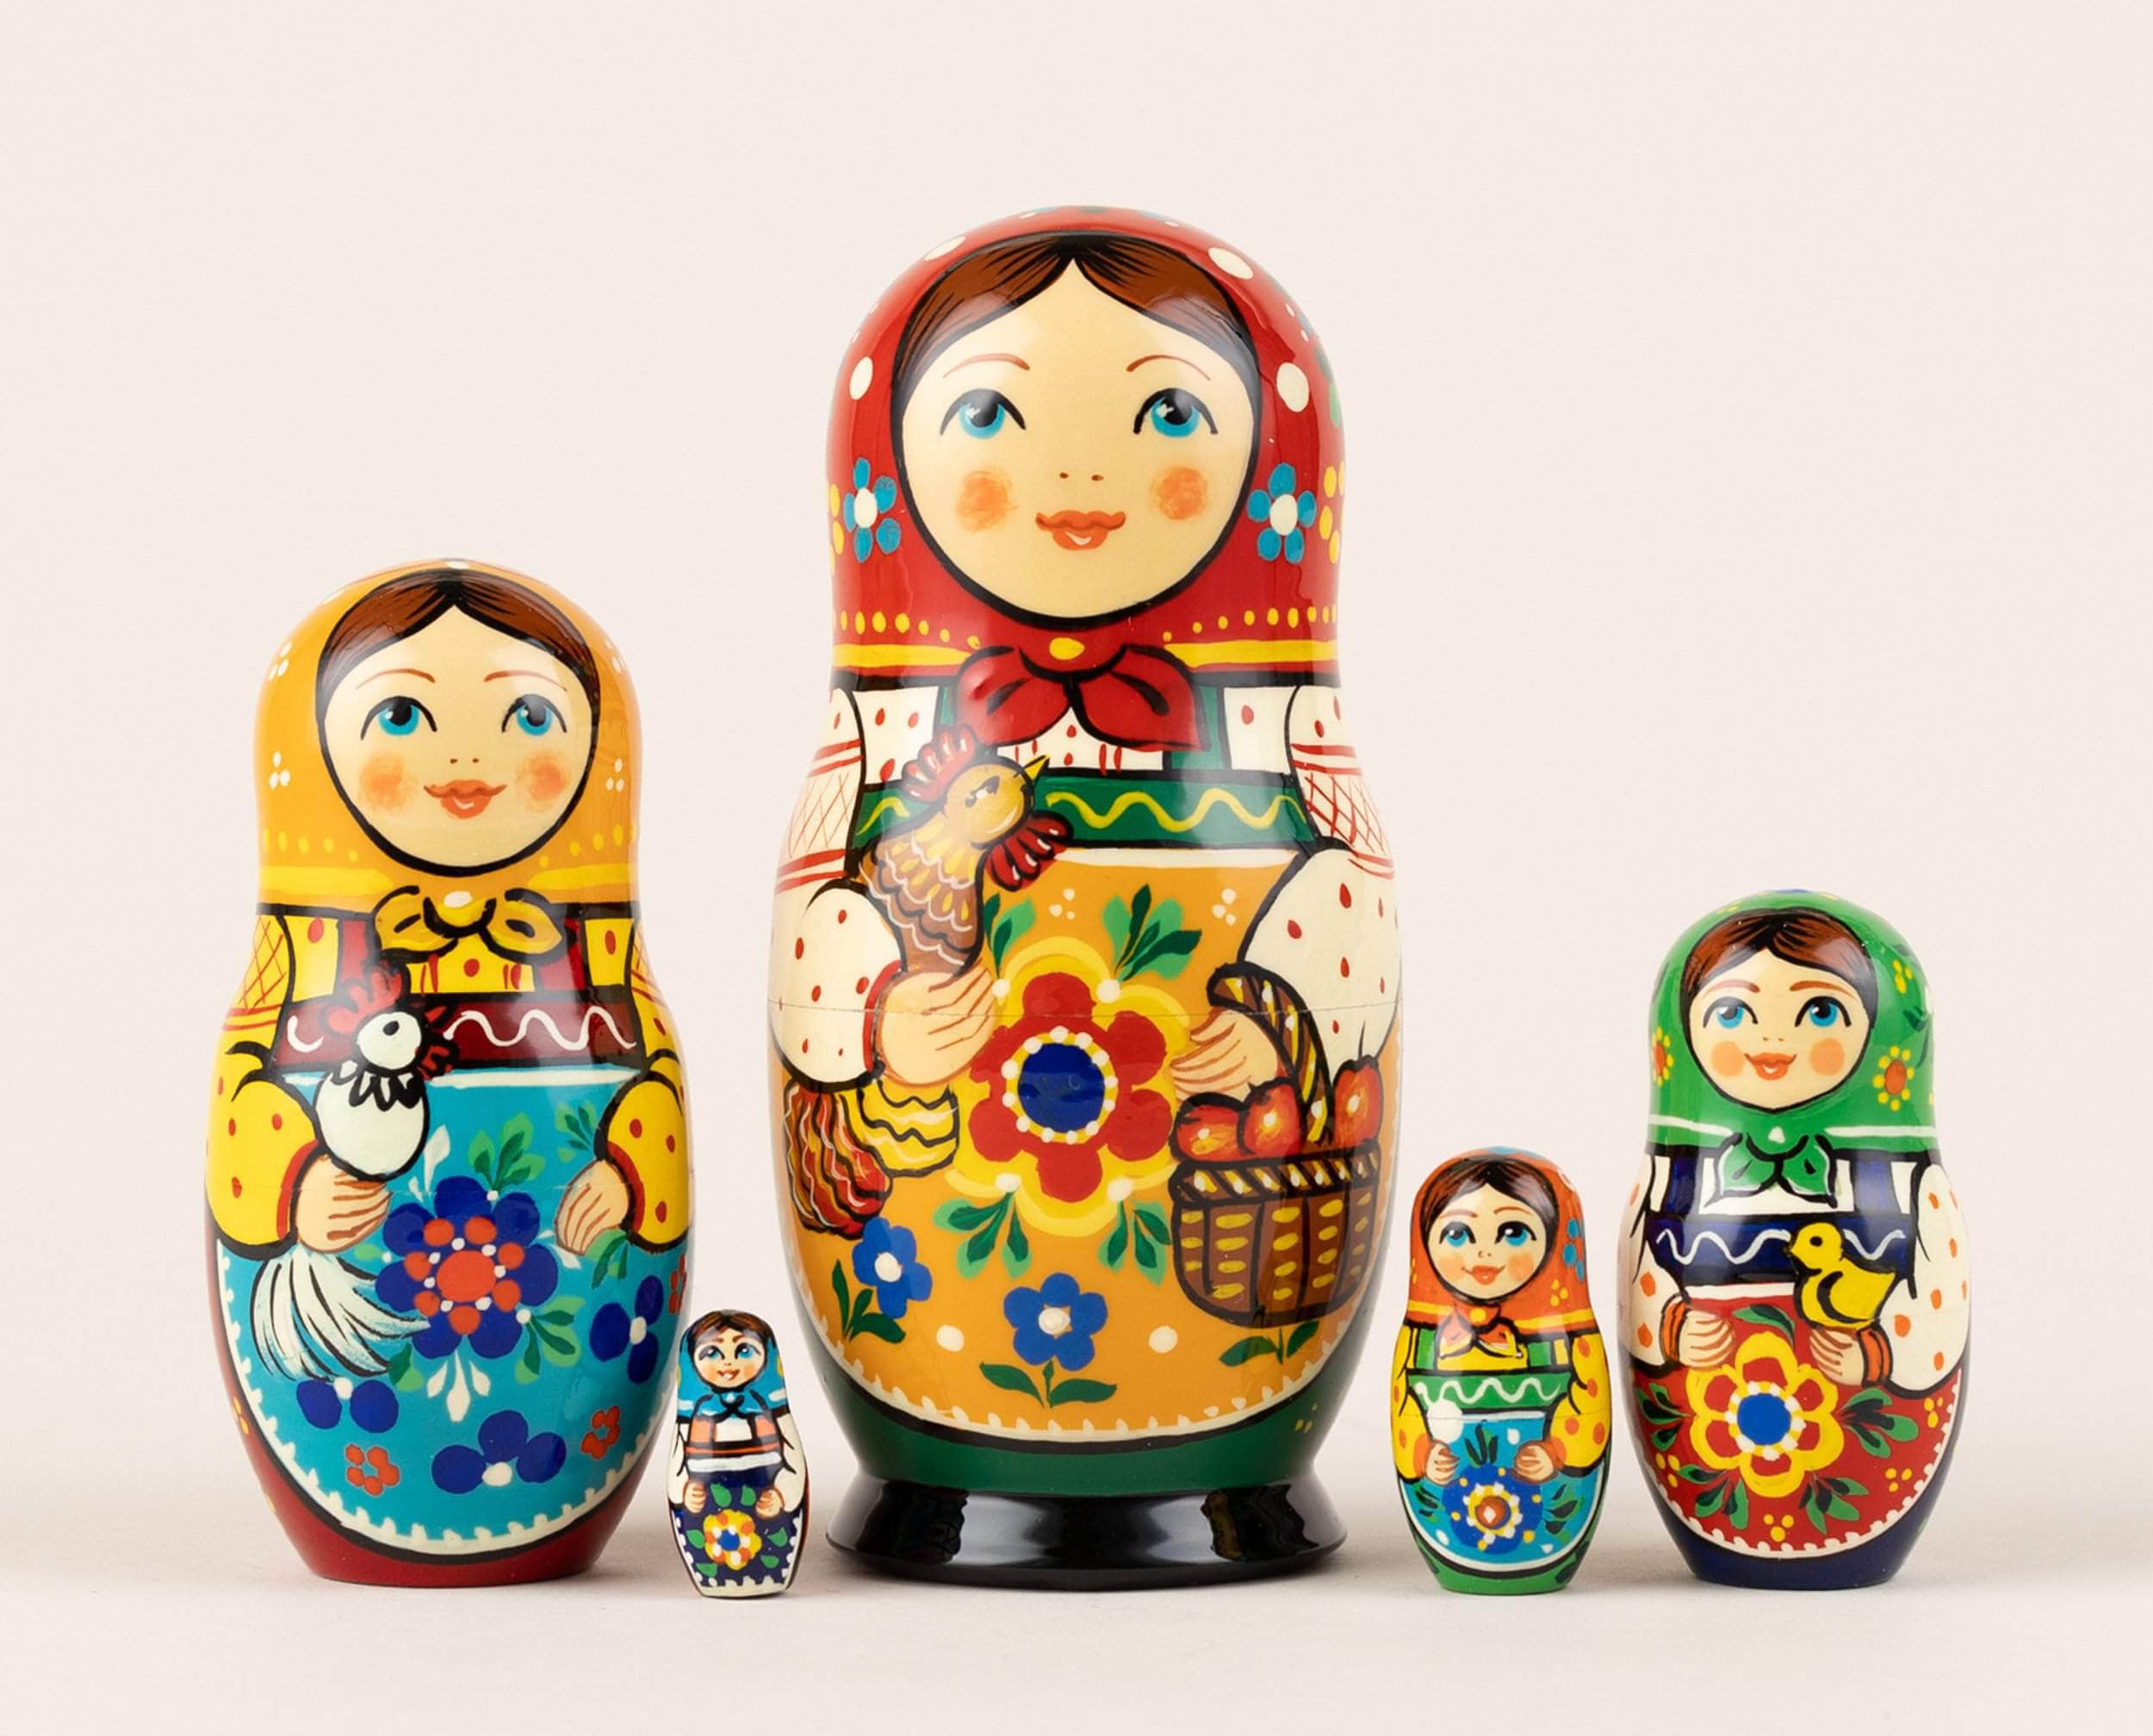 Nesting dolls with the First ever made matryoshka